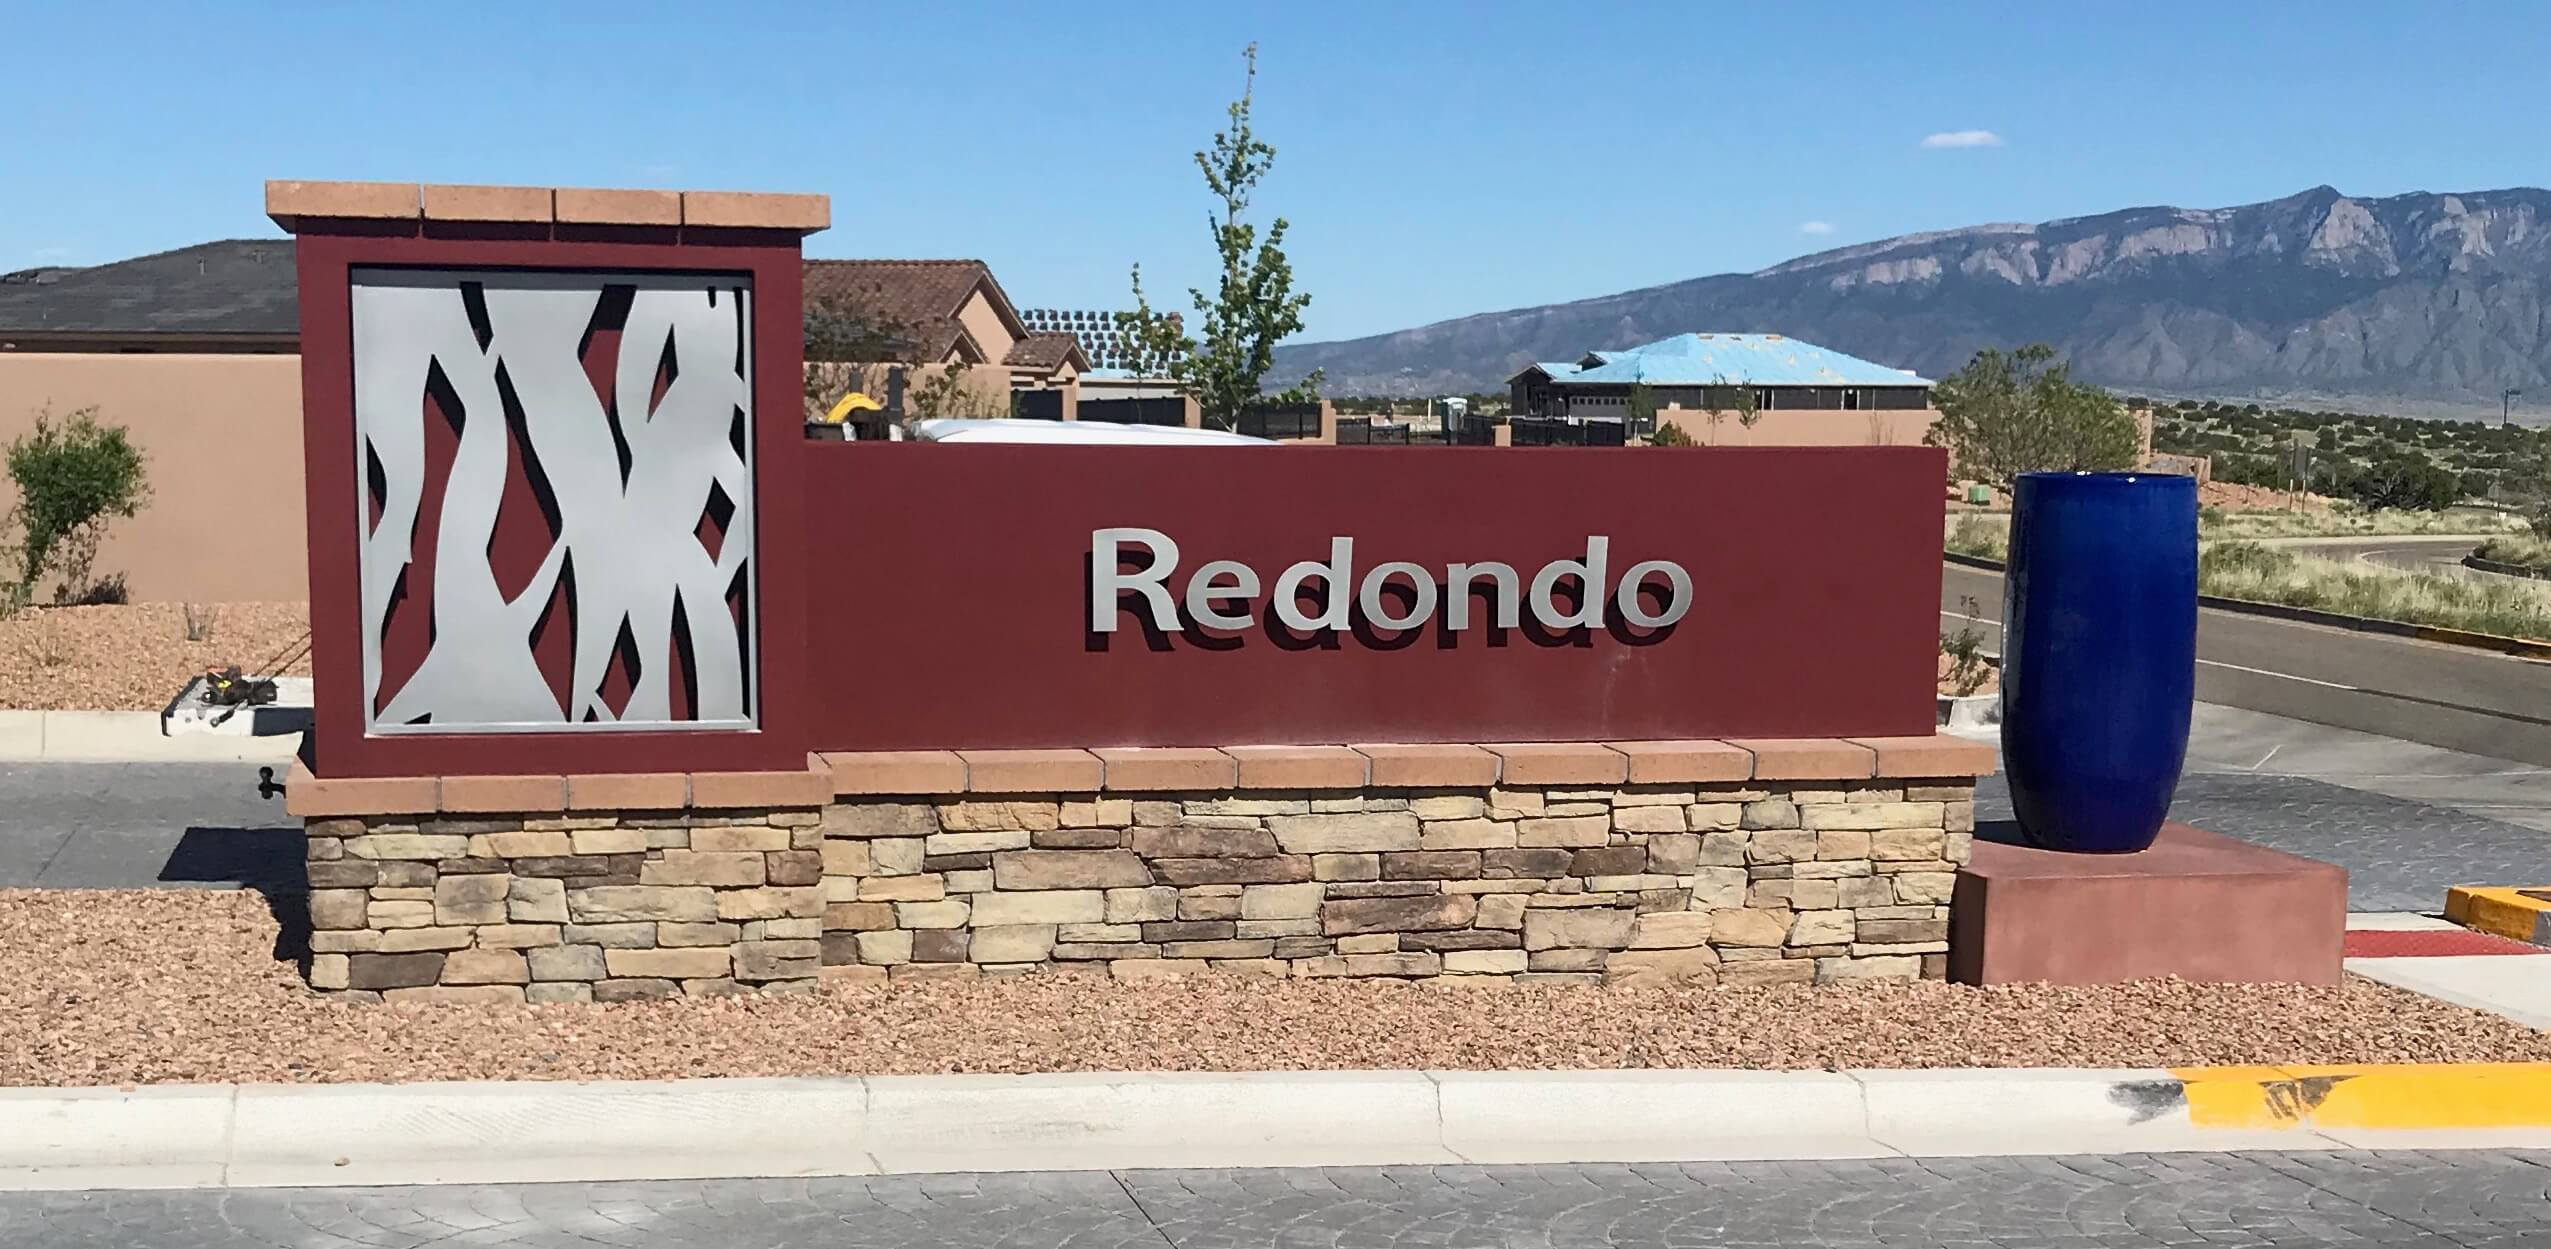 rust color metal sign that says Redondo and stainless steel metal cutout of abstract tree trunks built on stack stone pediment in front of entrance to neighborhood, mountains in backround, southwestern setting